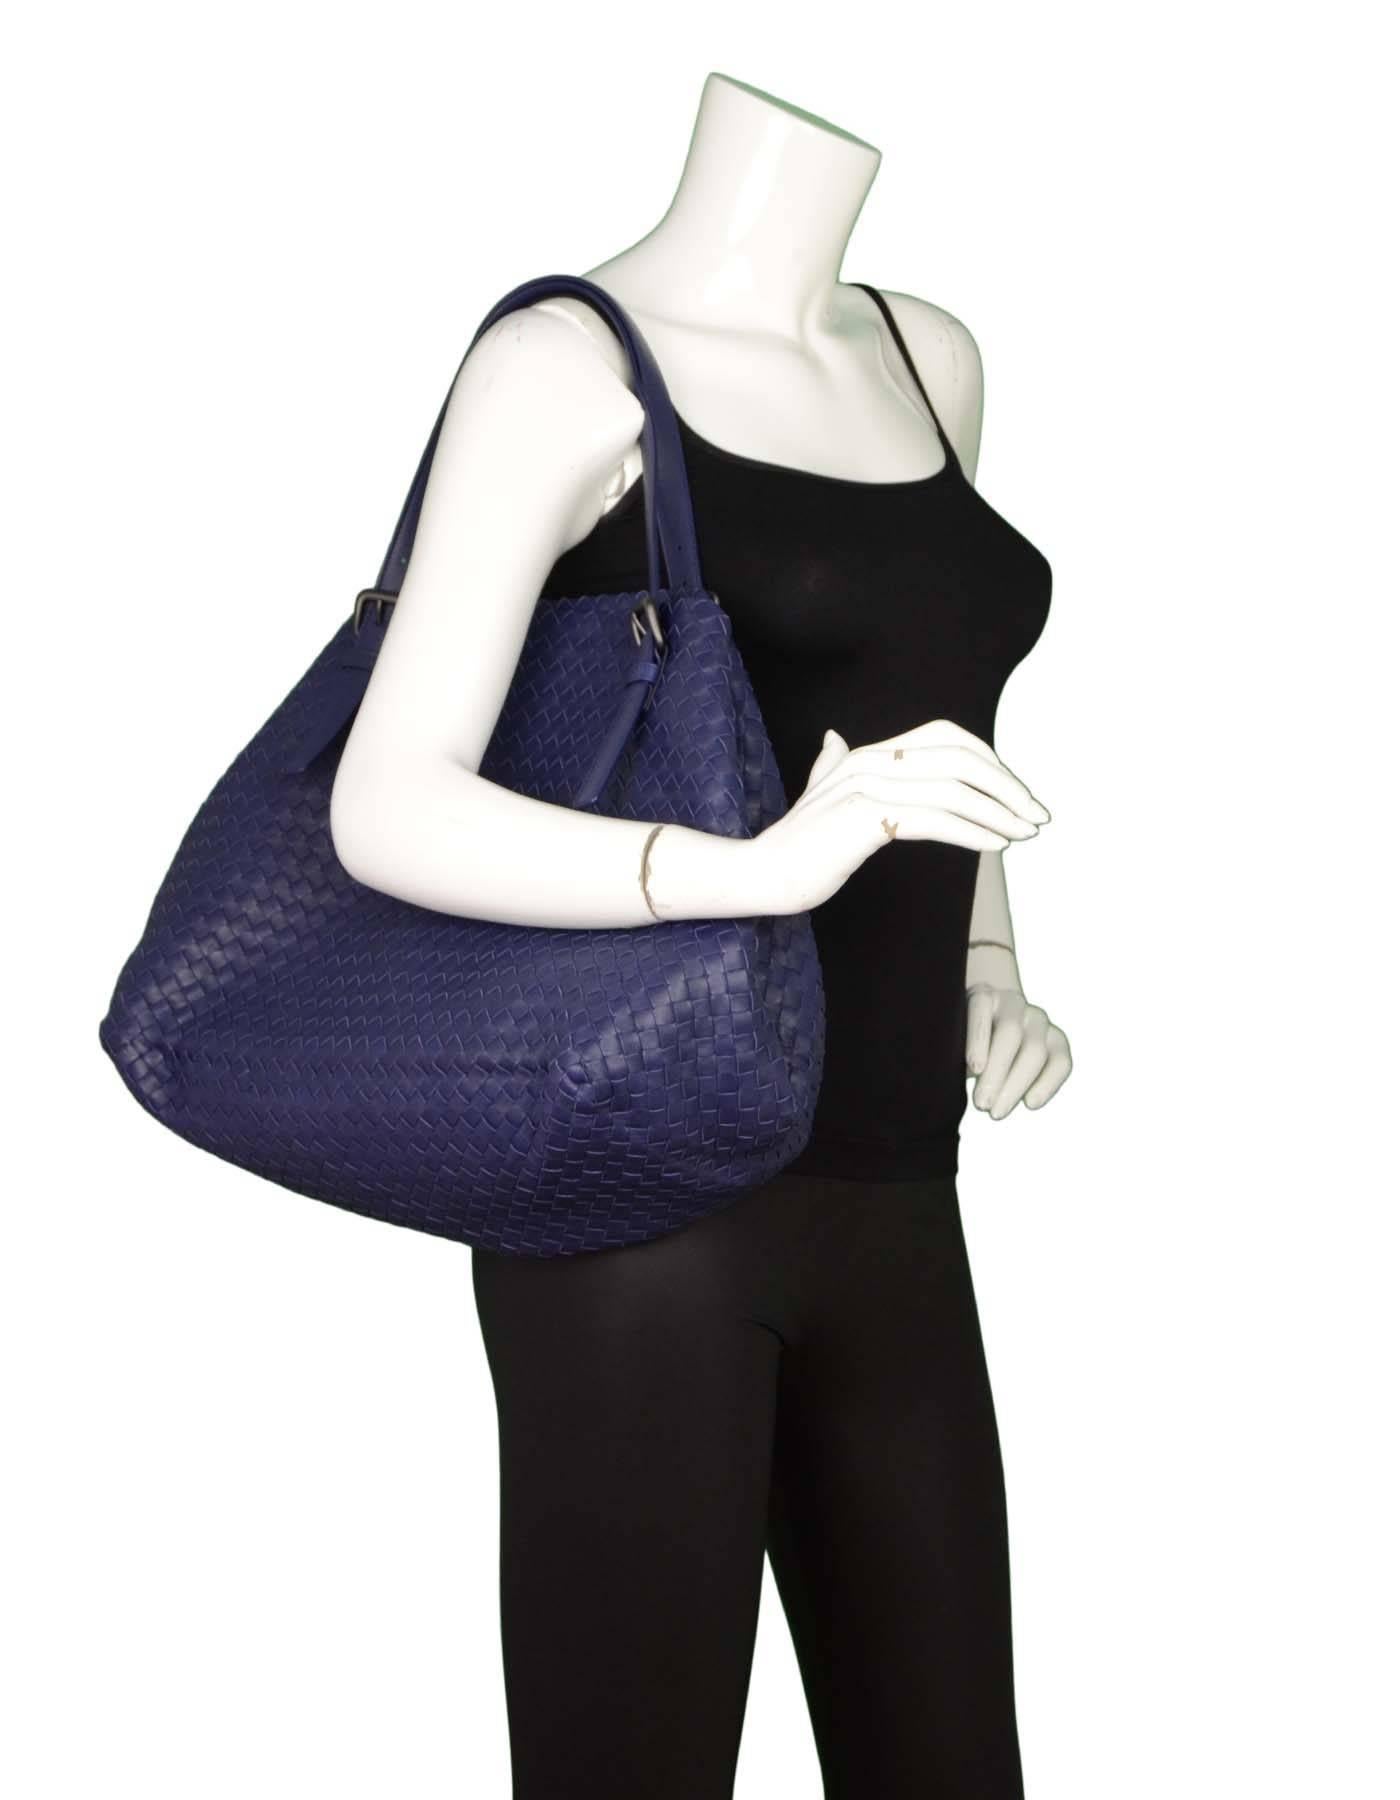 Bottega Veneta Navy Intrecciato Large Tote

Made In: Italy
Color: Navy
Hardware: Matte gunmetal
Materials: Nappa leather
Lining: Taupe suede
Closure/Opening: Open top with center lobster clasp
Exterior Pockets: None
Interior Pockets: One